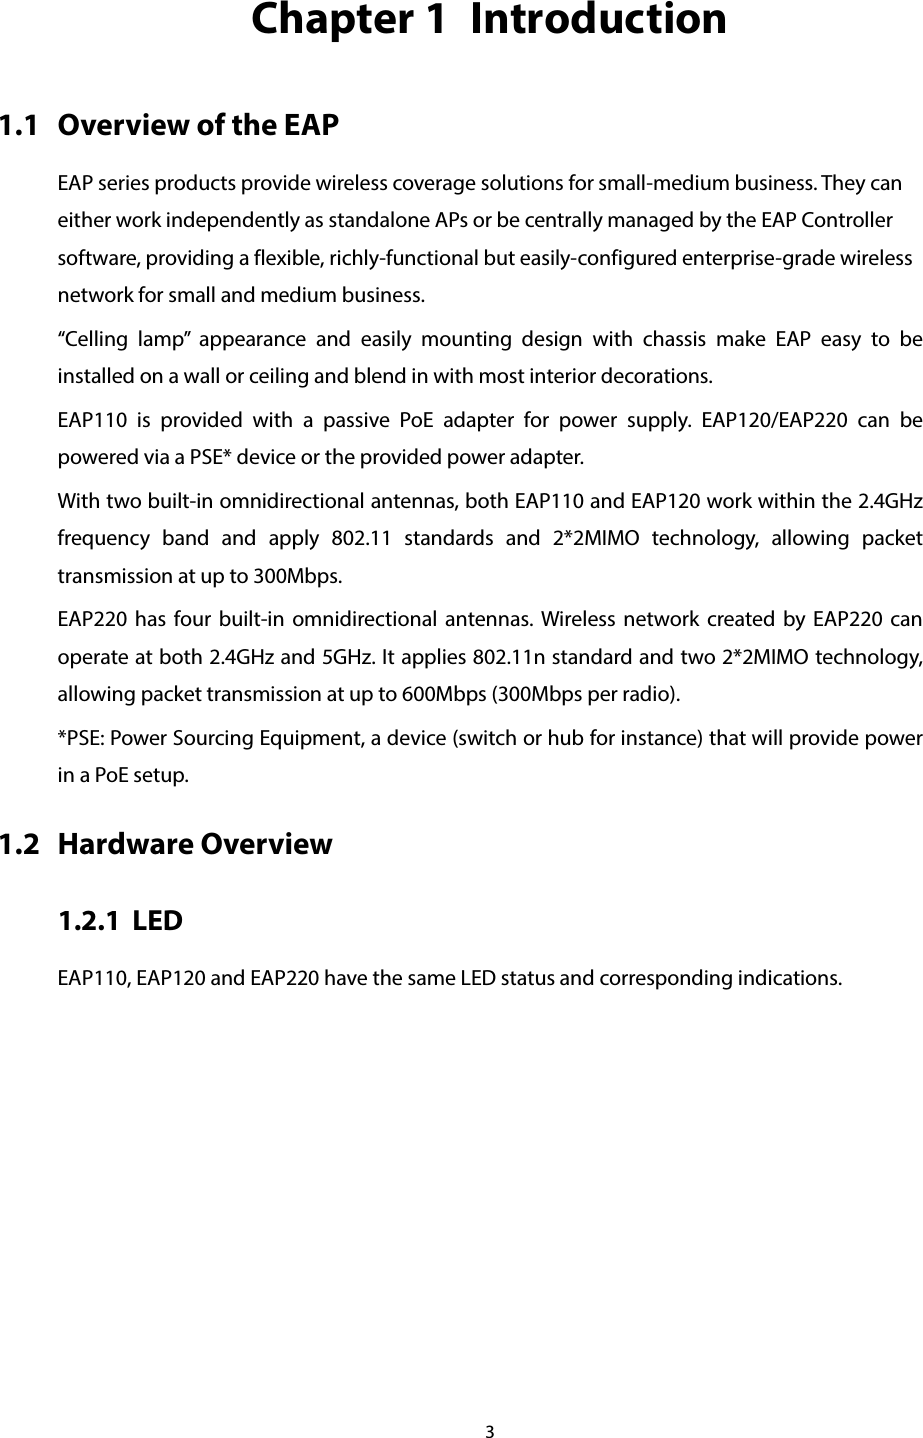 3  Chapter 1  Introduction 1.1 Overview of the EAP EAP series products provide wireless coverage solutions for small-medium business. They can either work independently as standalone APs or be centrally managed by the EAP Controller software, providing a flexible, richly-functional but easily-configured enterprise-grade wireless network for small and medium business. “Celling lamp” appearance and easily mounting design with chassis make EAP easy to be installed on a wall or ceiling and blend in with most interior decorations.   EAP110 is provided with a passive PoE adapter for power supply.  EAP120/EAP220 can be powered via a PSE* device or the provided power adapter. With two built-in omnidirectional antennas, both EAP110 and EAP120 work within the 2.4GHz frequency band and apply 802.11  standards  and 2*2MIMO technology, allowing packet transmission at up to 300Mbps.   EAP220 has four built-in omnidirectional antennas. Wireless network created by EAP220 can operate at both 2.4GHz and 5GHz. It applies 802.11n standard and two 2*2MIMO technology, allowing packet transmission at up to 600Mbps (300Mbps per radio). *PSE: Power Sourcing Equipment, a device (switch or hub for instance) that will provide power in a PoE setup. 1.2 Hardware Overview 1.2.1 LED EAP110, EAP120 and EAP220 have the same LED status and corresponding indications. 